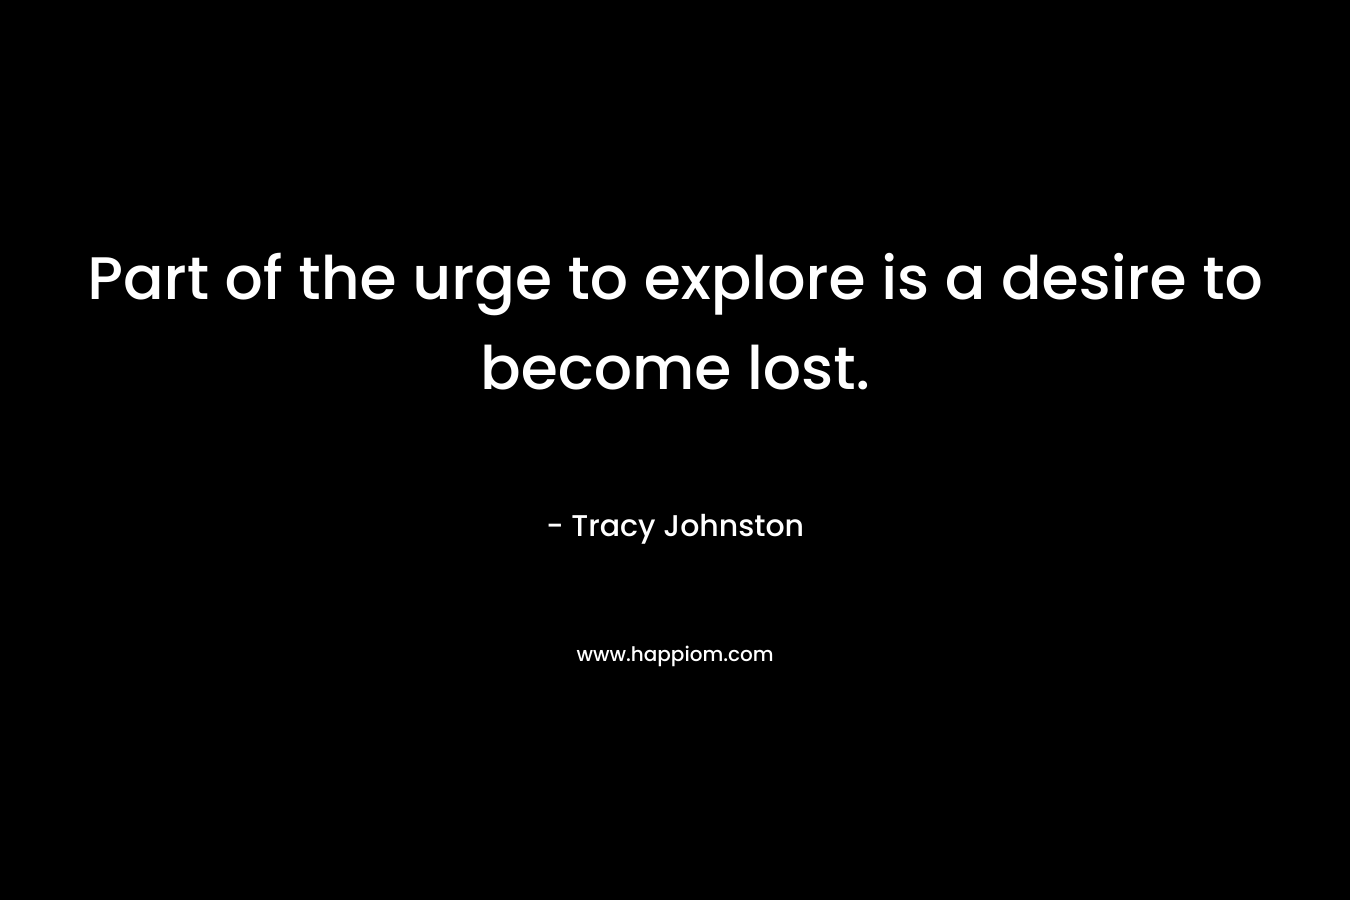 Part of the urge to explore is a desire to become lost.